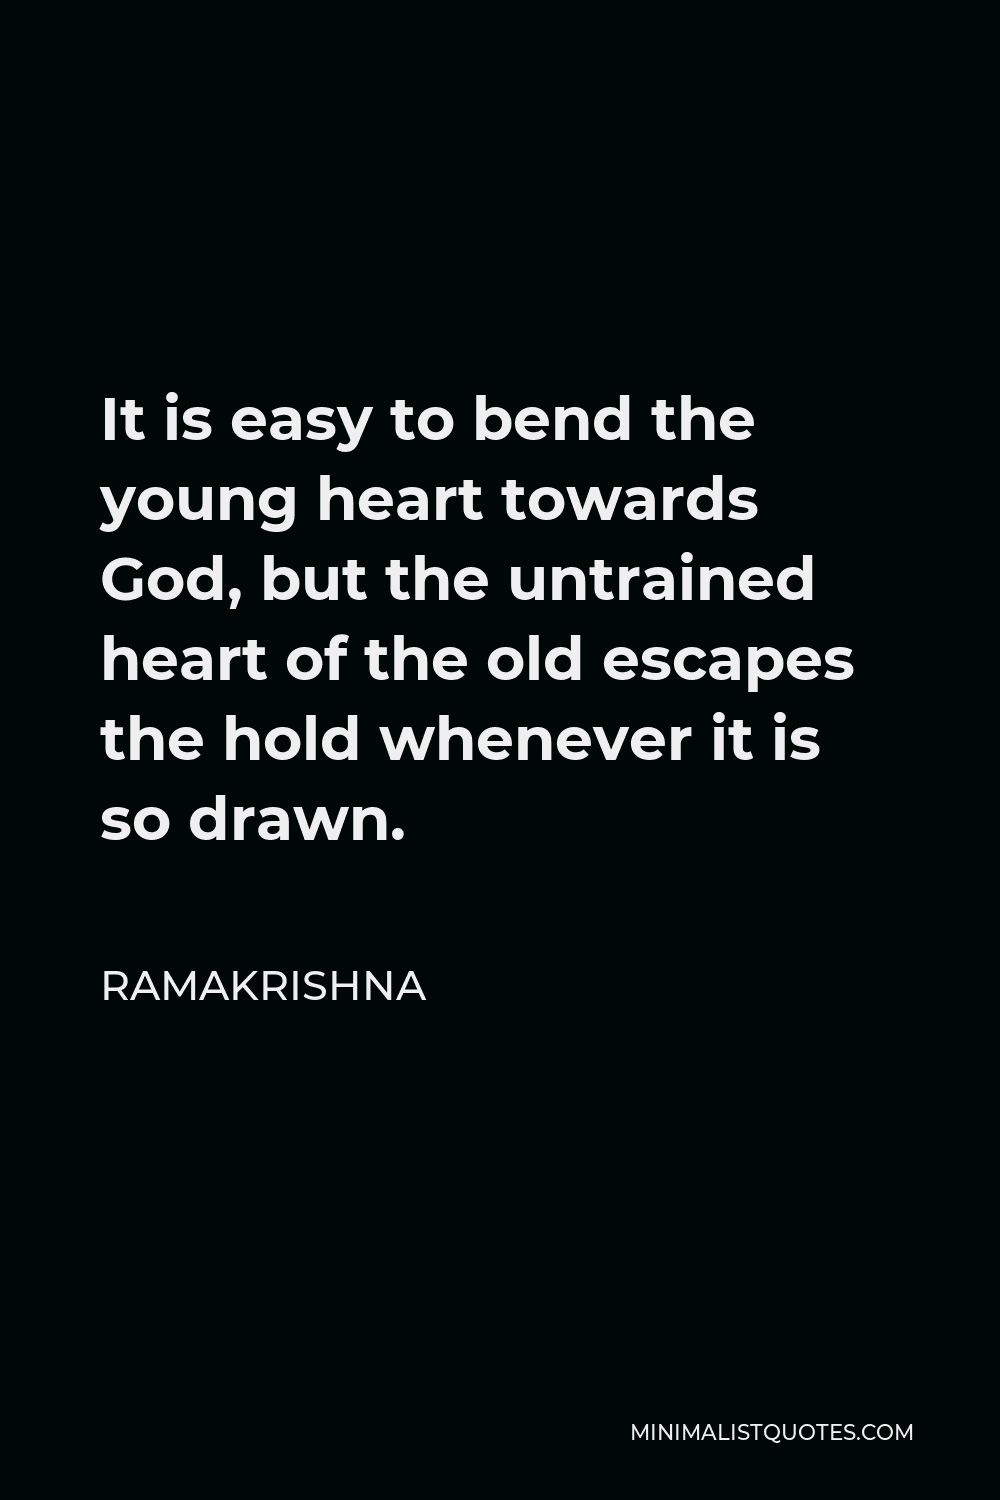 Ramakrishna Quote - It is easy to bend the young heart towards God, but the untrained heart of the old escapes the hold whenever it is so drawn.